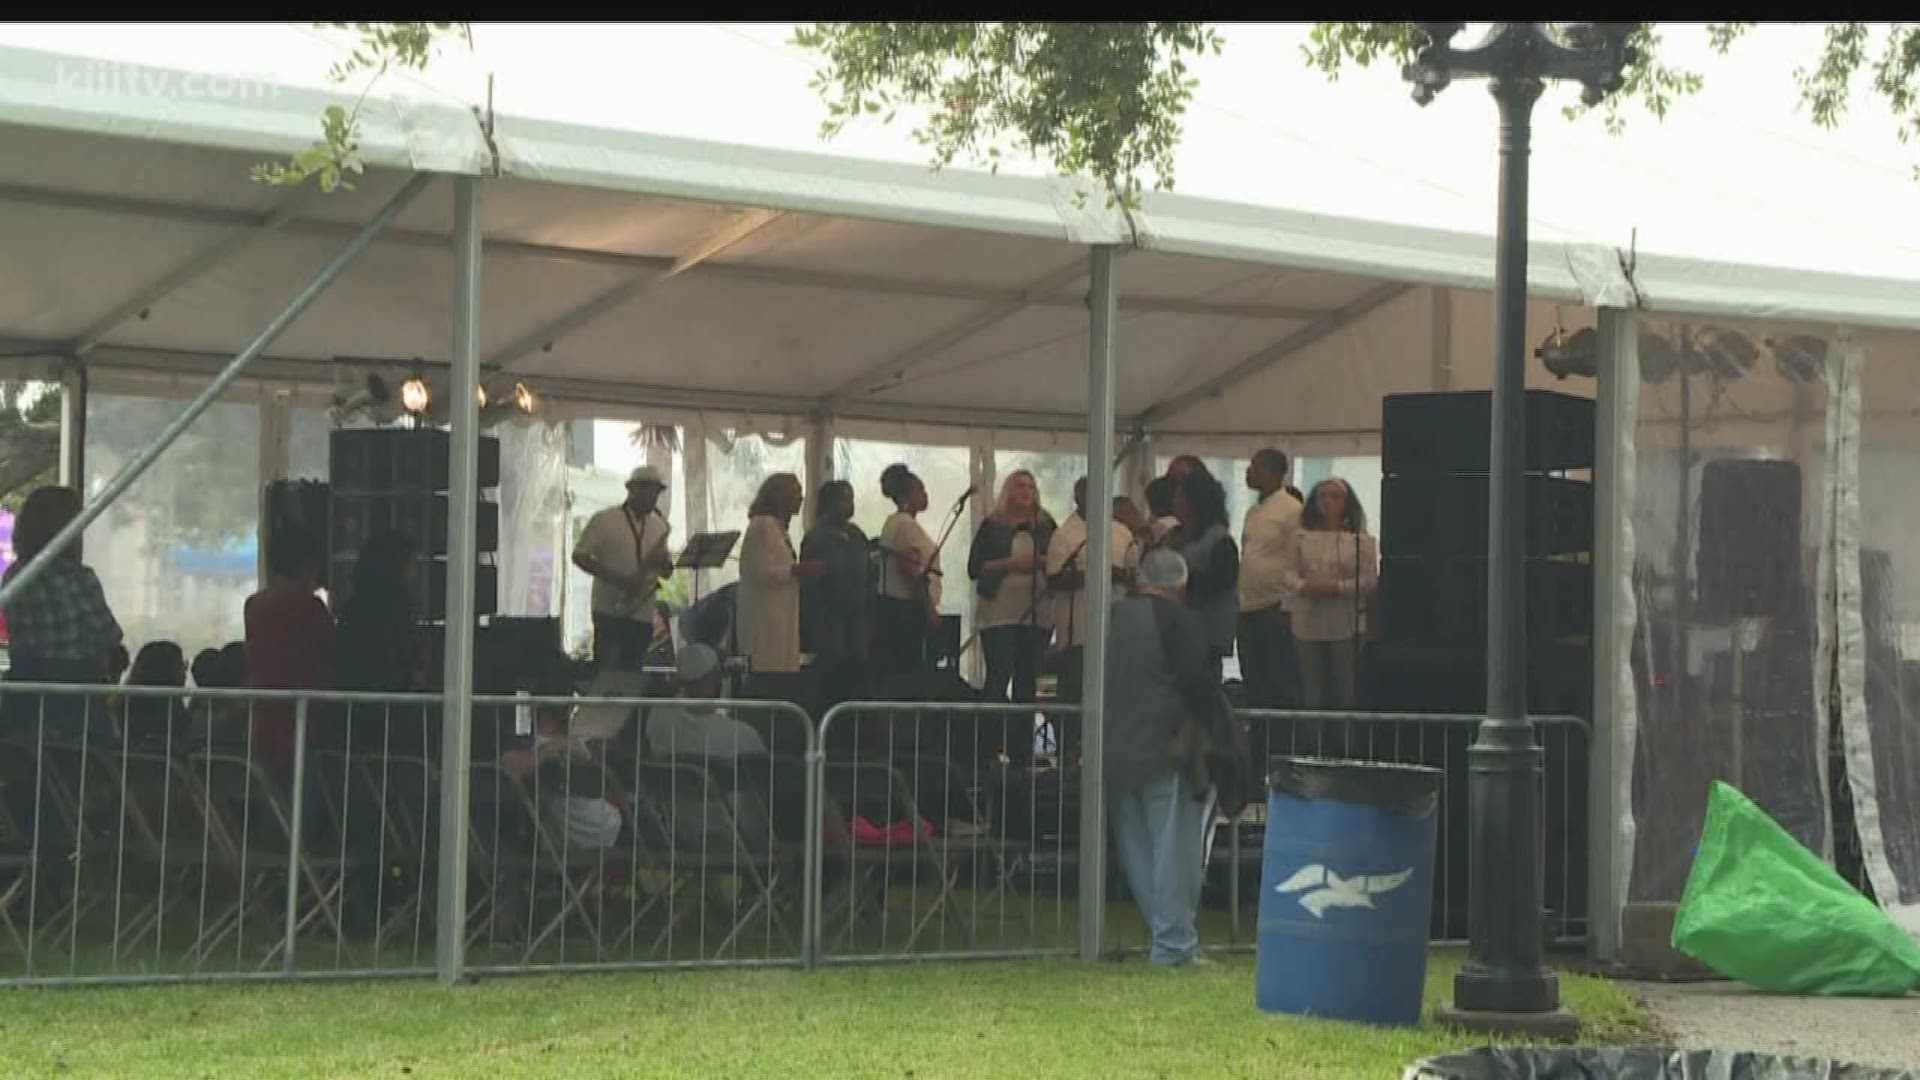 Sunday wrapped up the 58th Annual Texas Jazz Festival